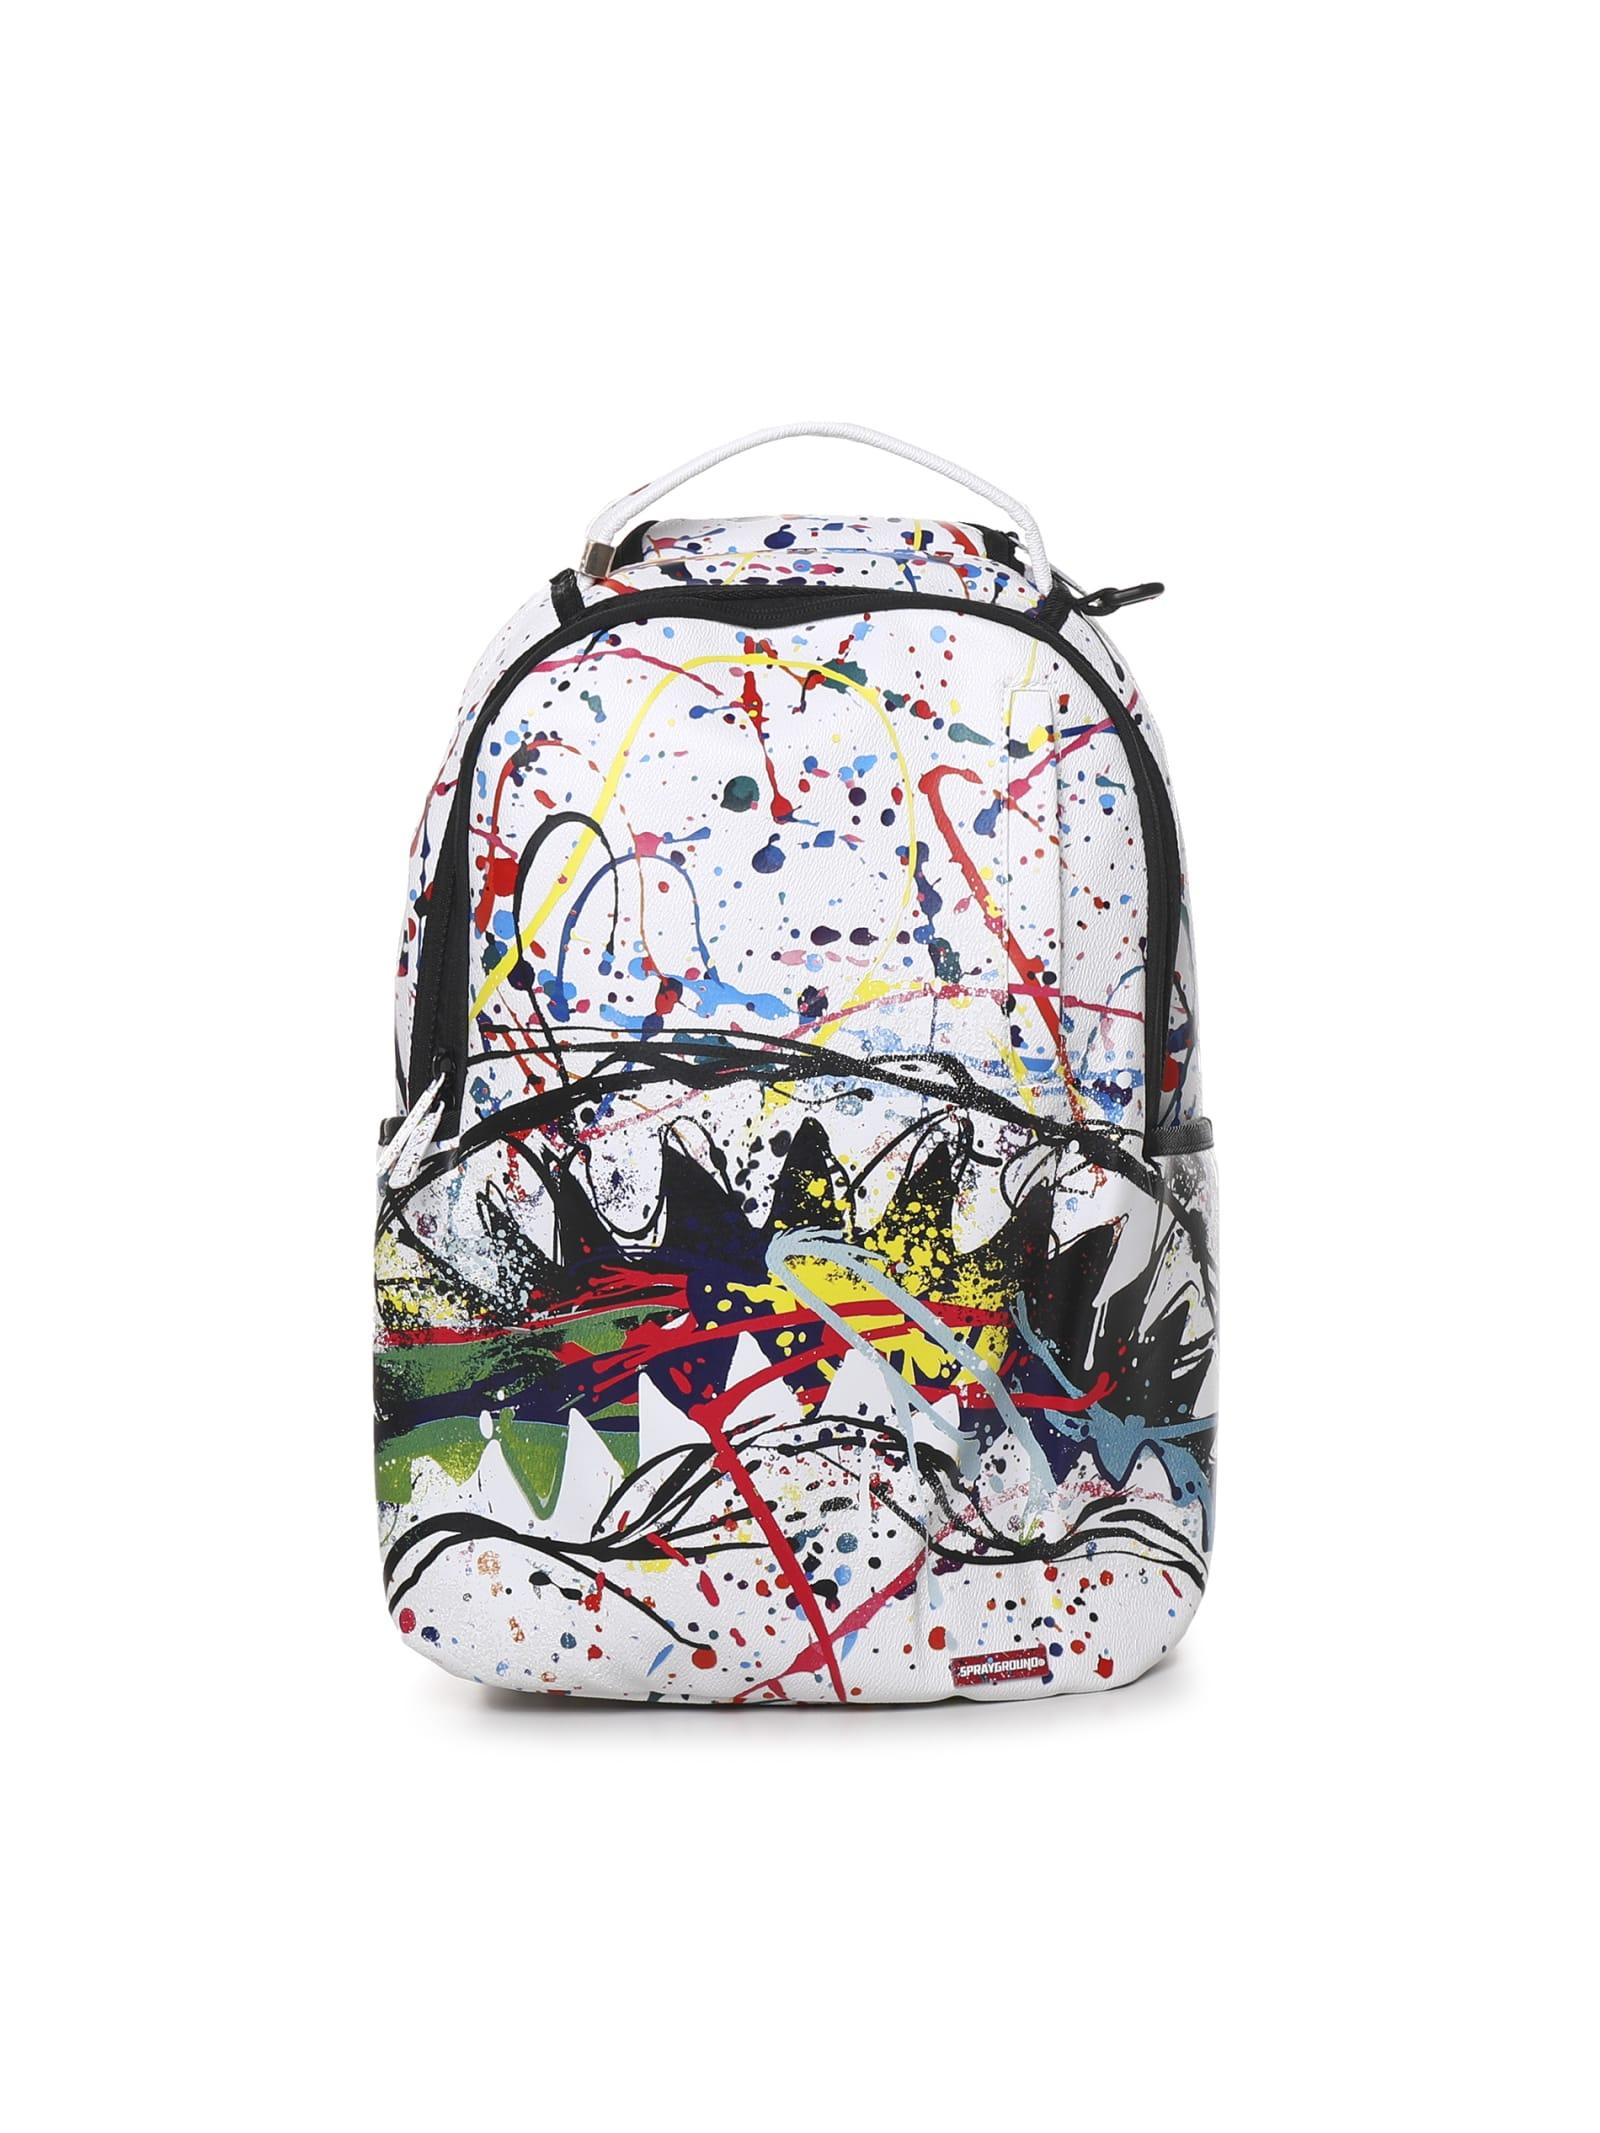 Sprayground Colorful After Backpack in White | Lyst